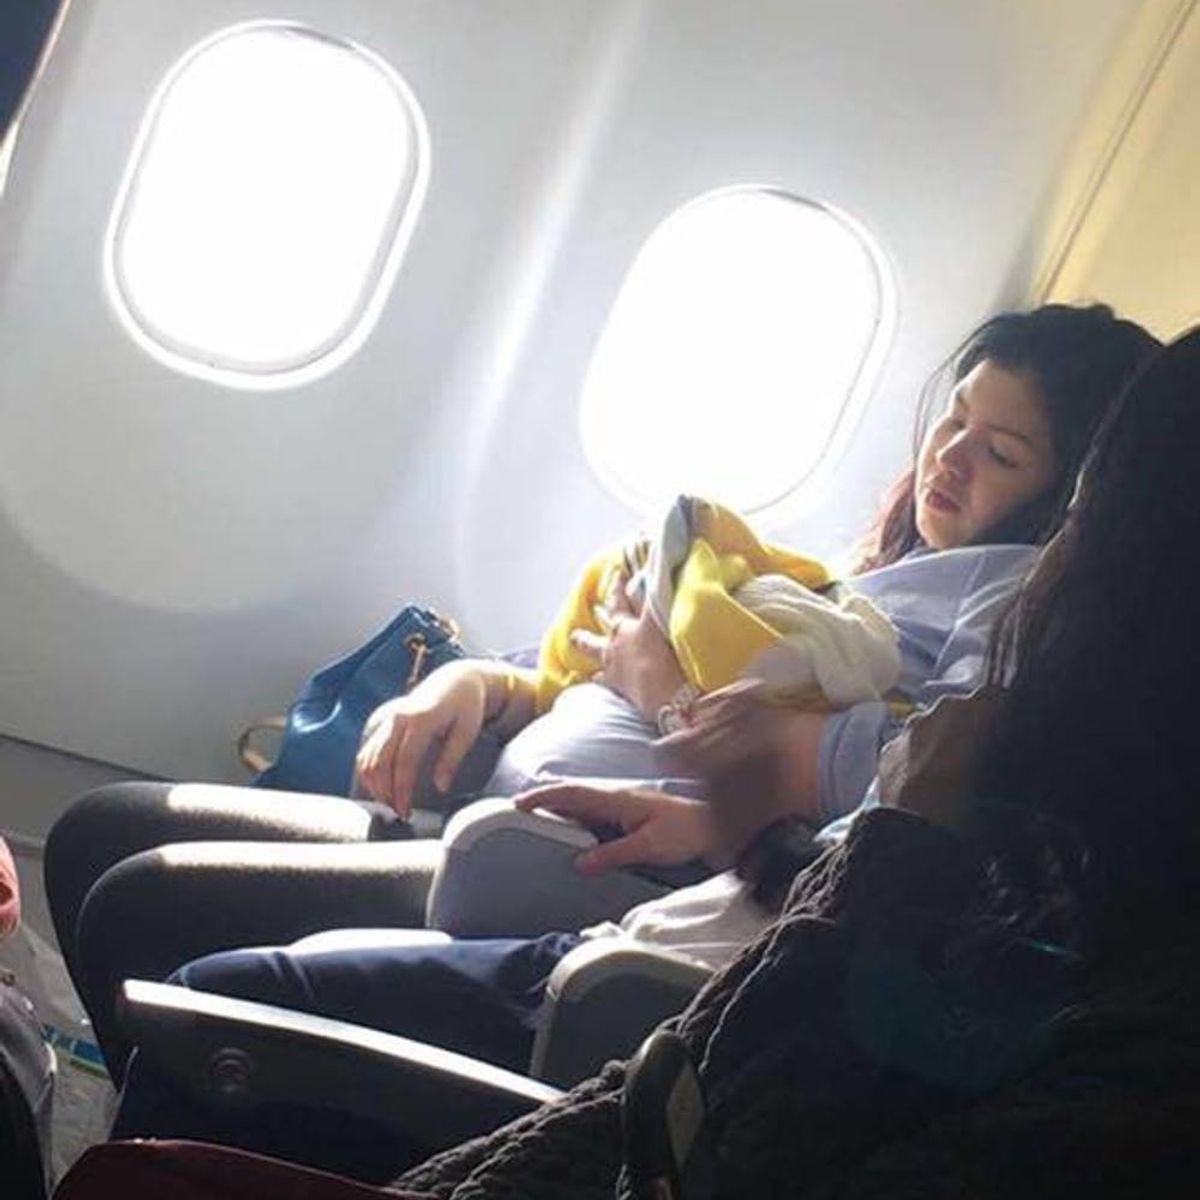 This Baby Who Was Born on a Plane Gets Free Flights for Life